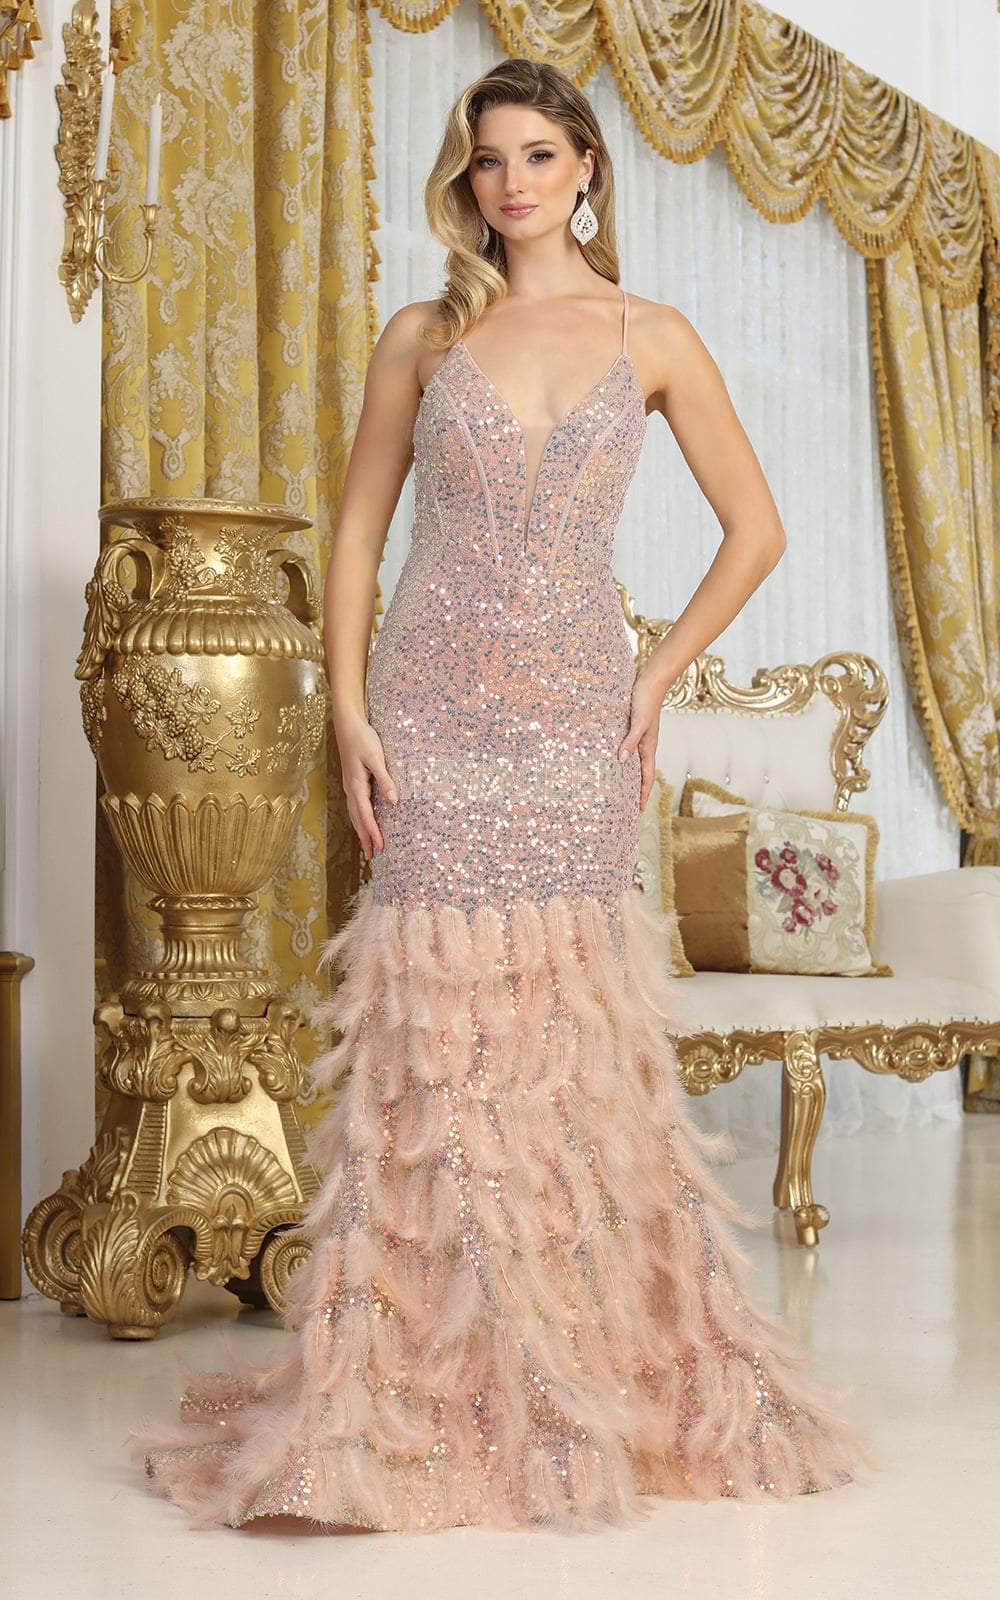 Image of May Queen RQ8076 - V-Neck Iridescent Sequin Prom Gown